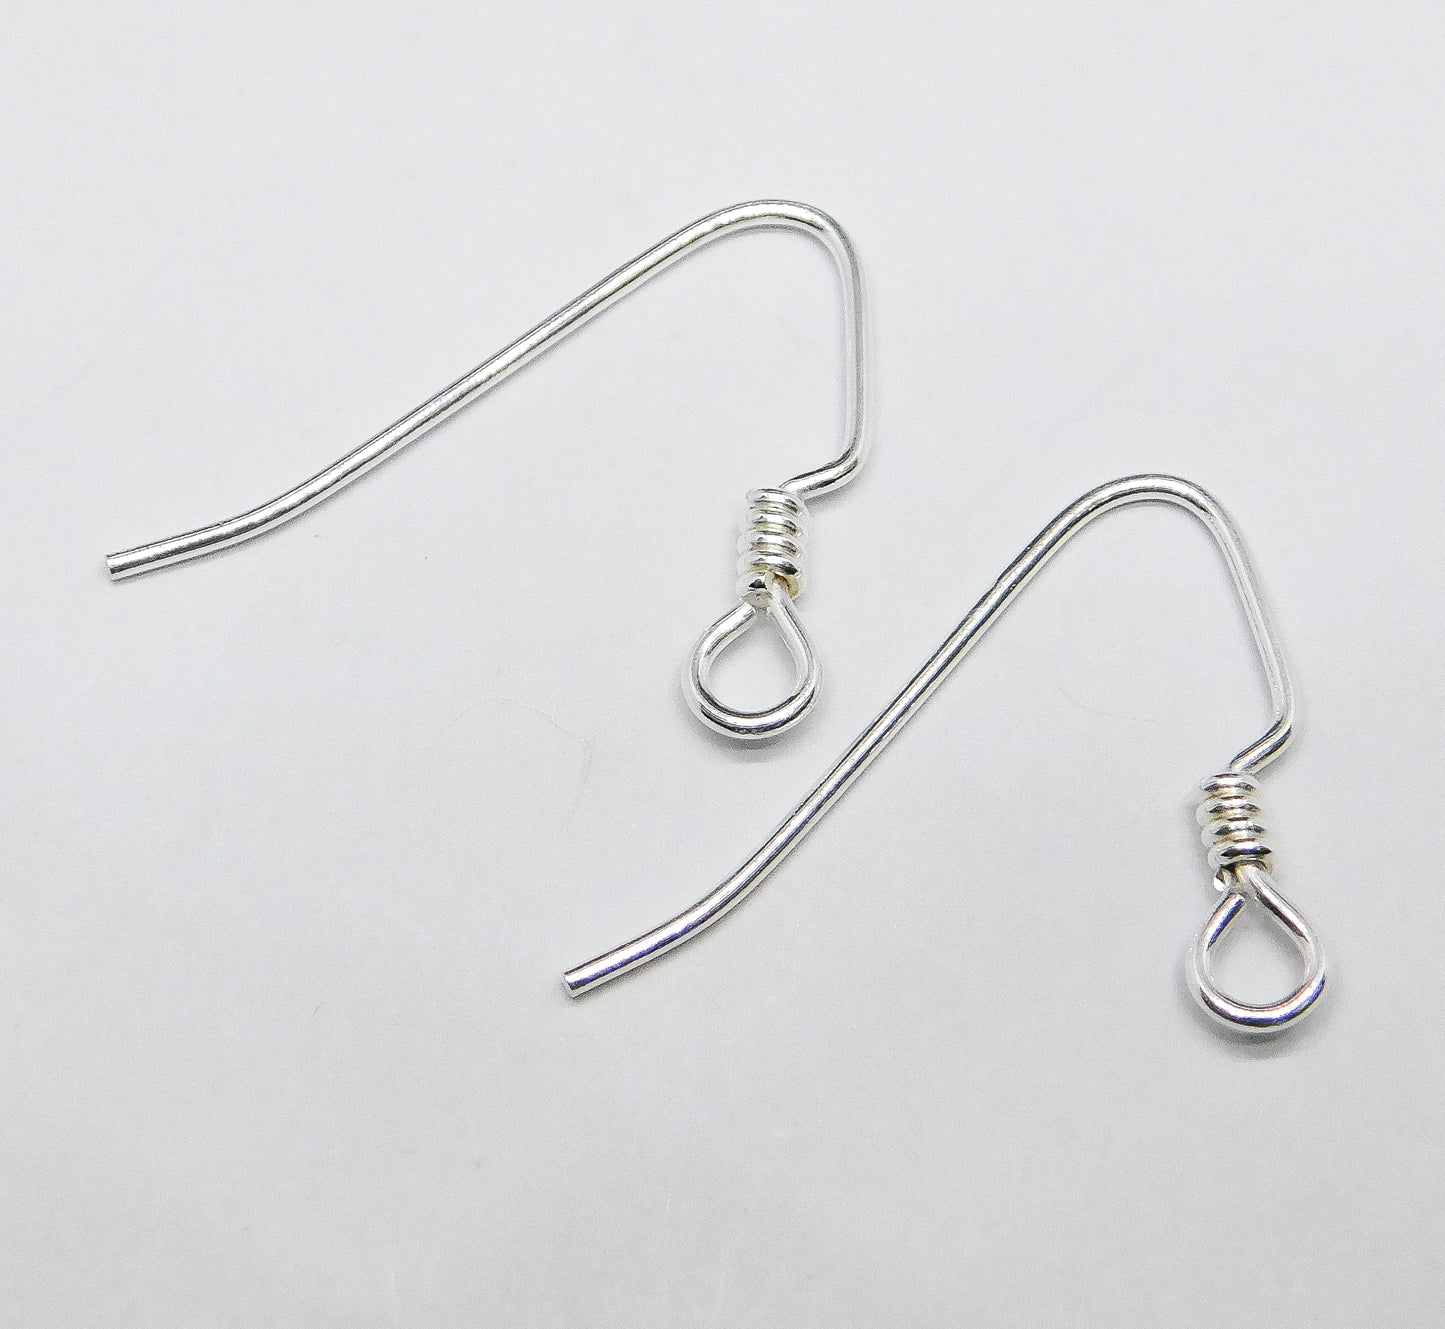 EAR WIRES WITH COIL